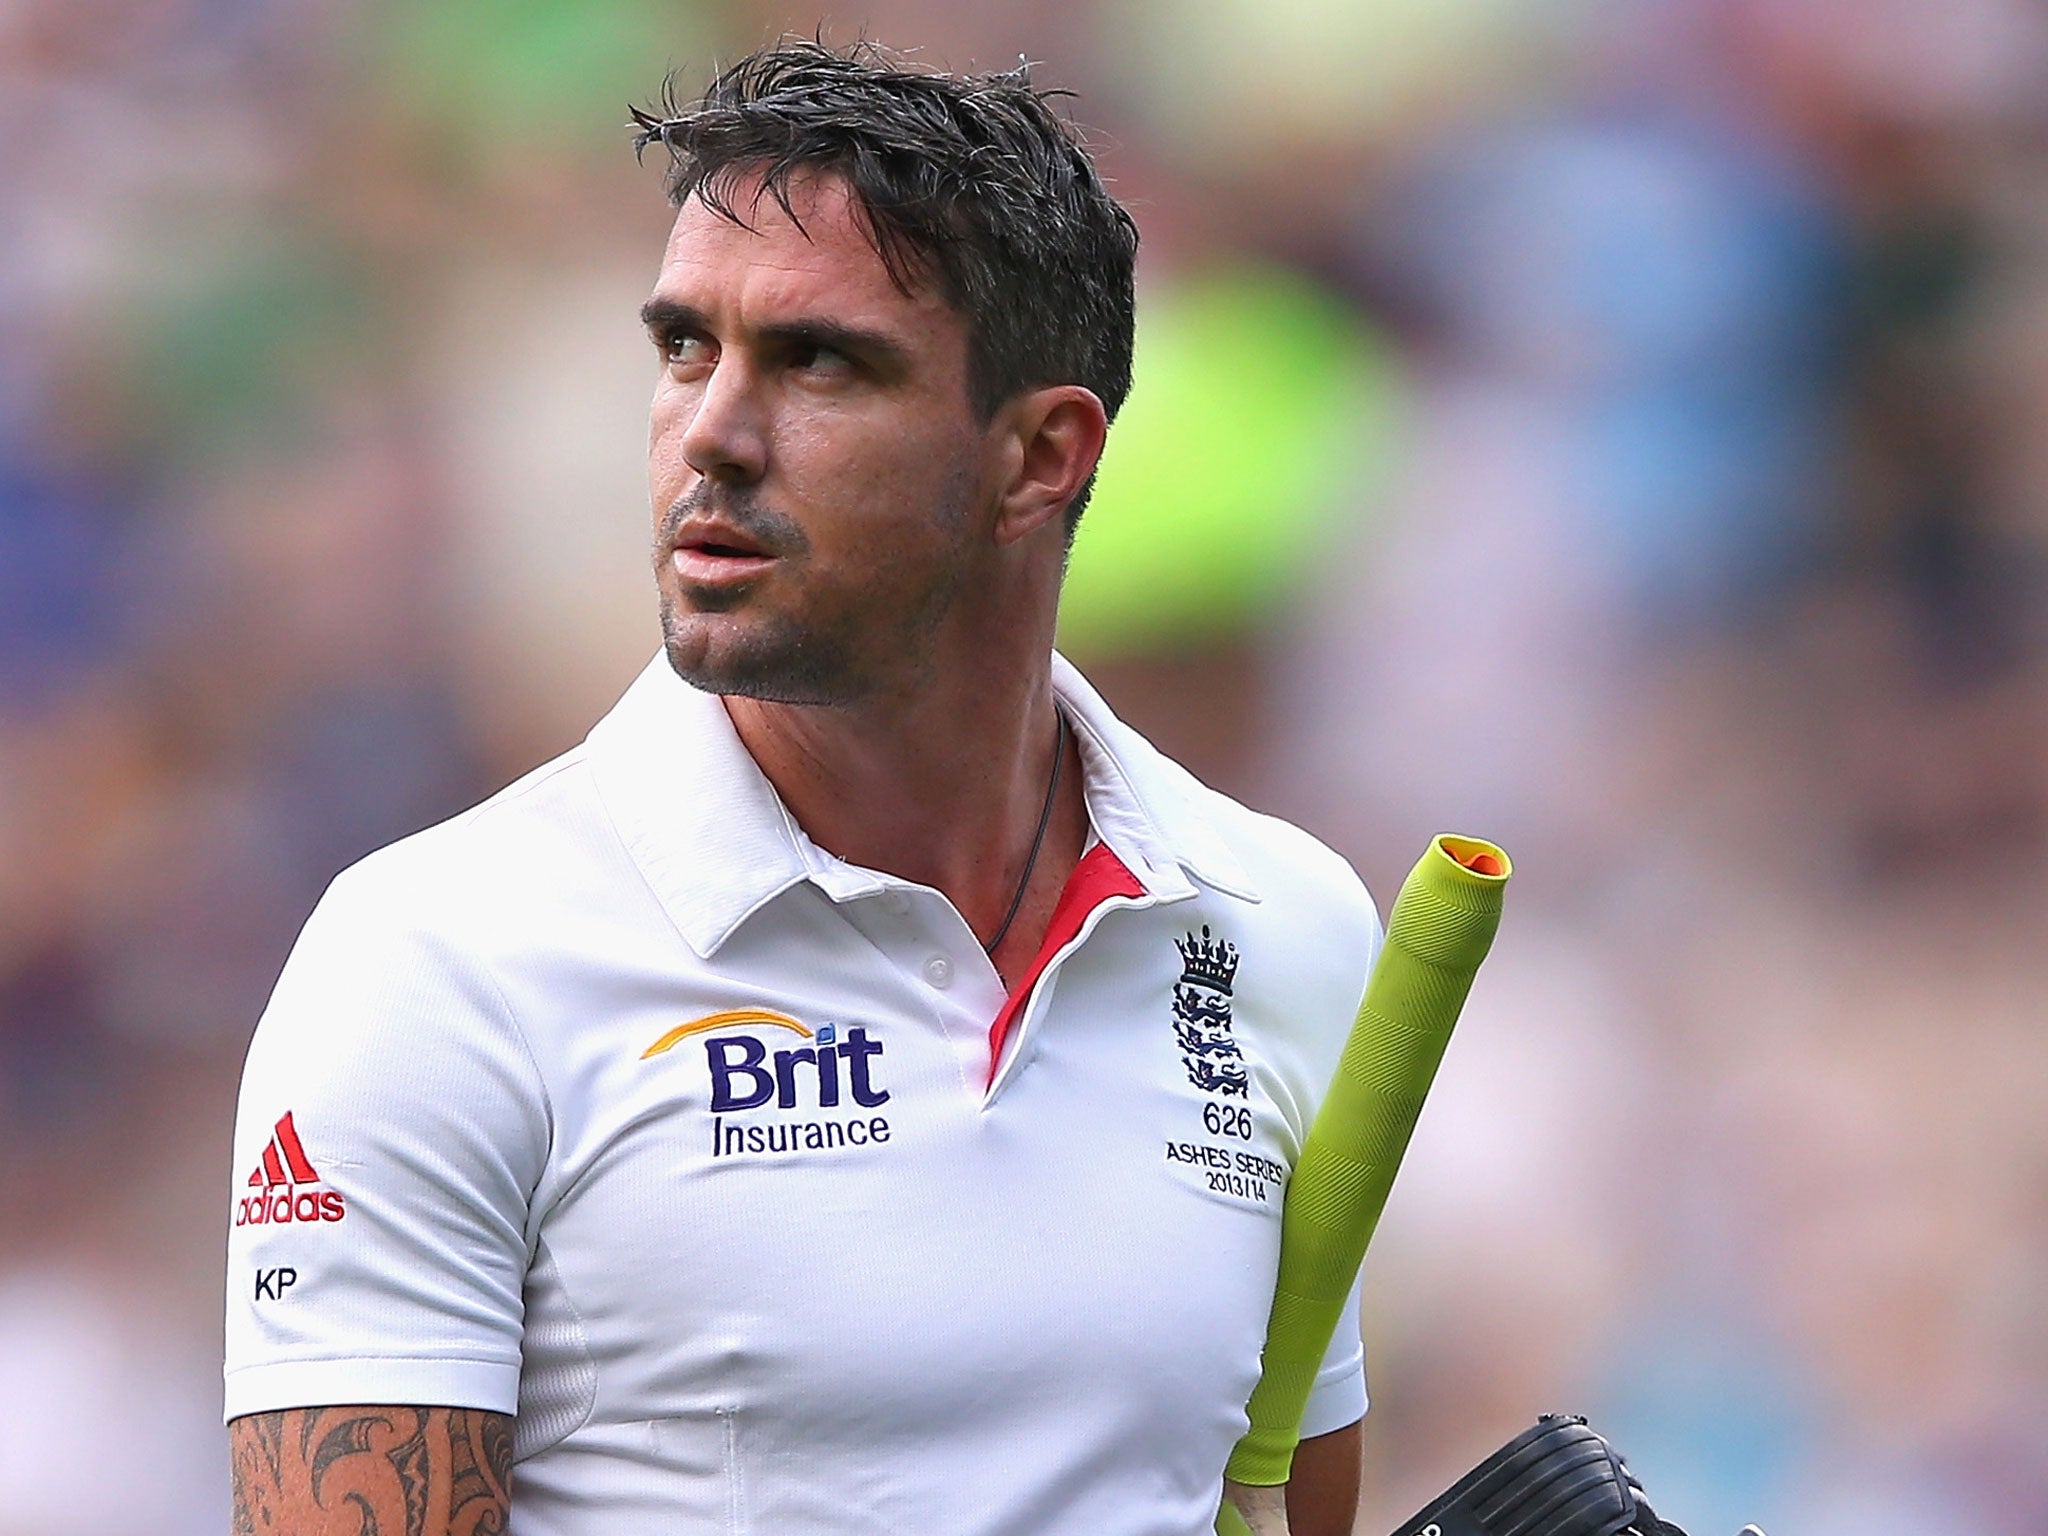 Kevin Pietersen's Blue Hair: A Fashion Statement or a Distraction? - wide 8